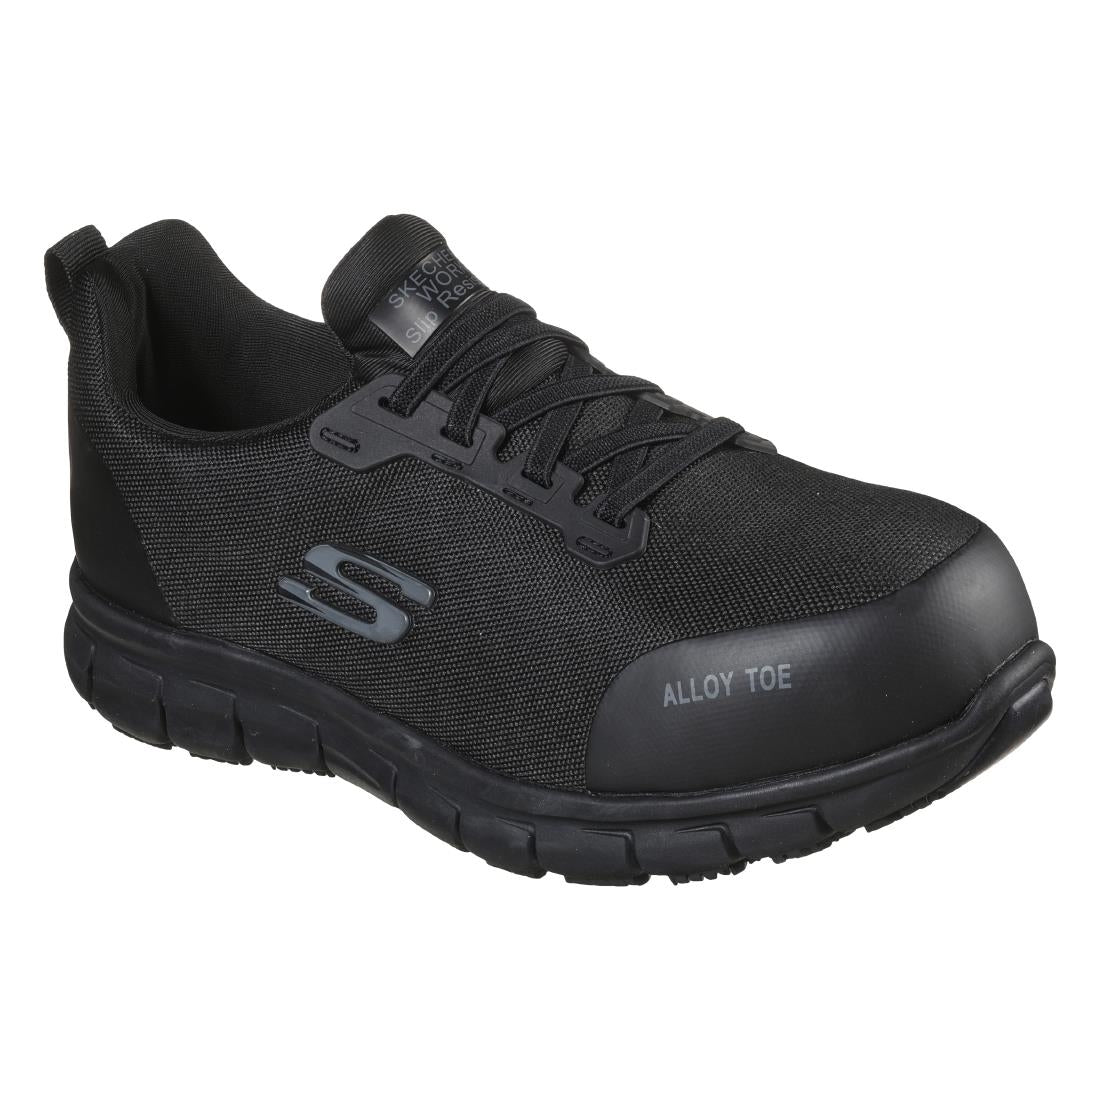 BB670-36 Skechers Womens Safety Shoe with Steel Toe Cap - Size 36 (UK 3) JD Catering Equipment Solutions Ltd